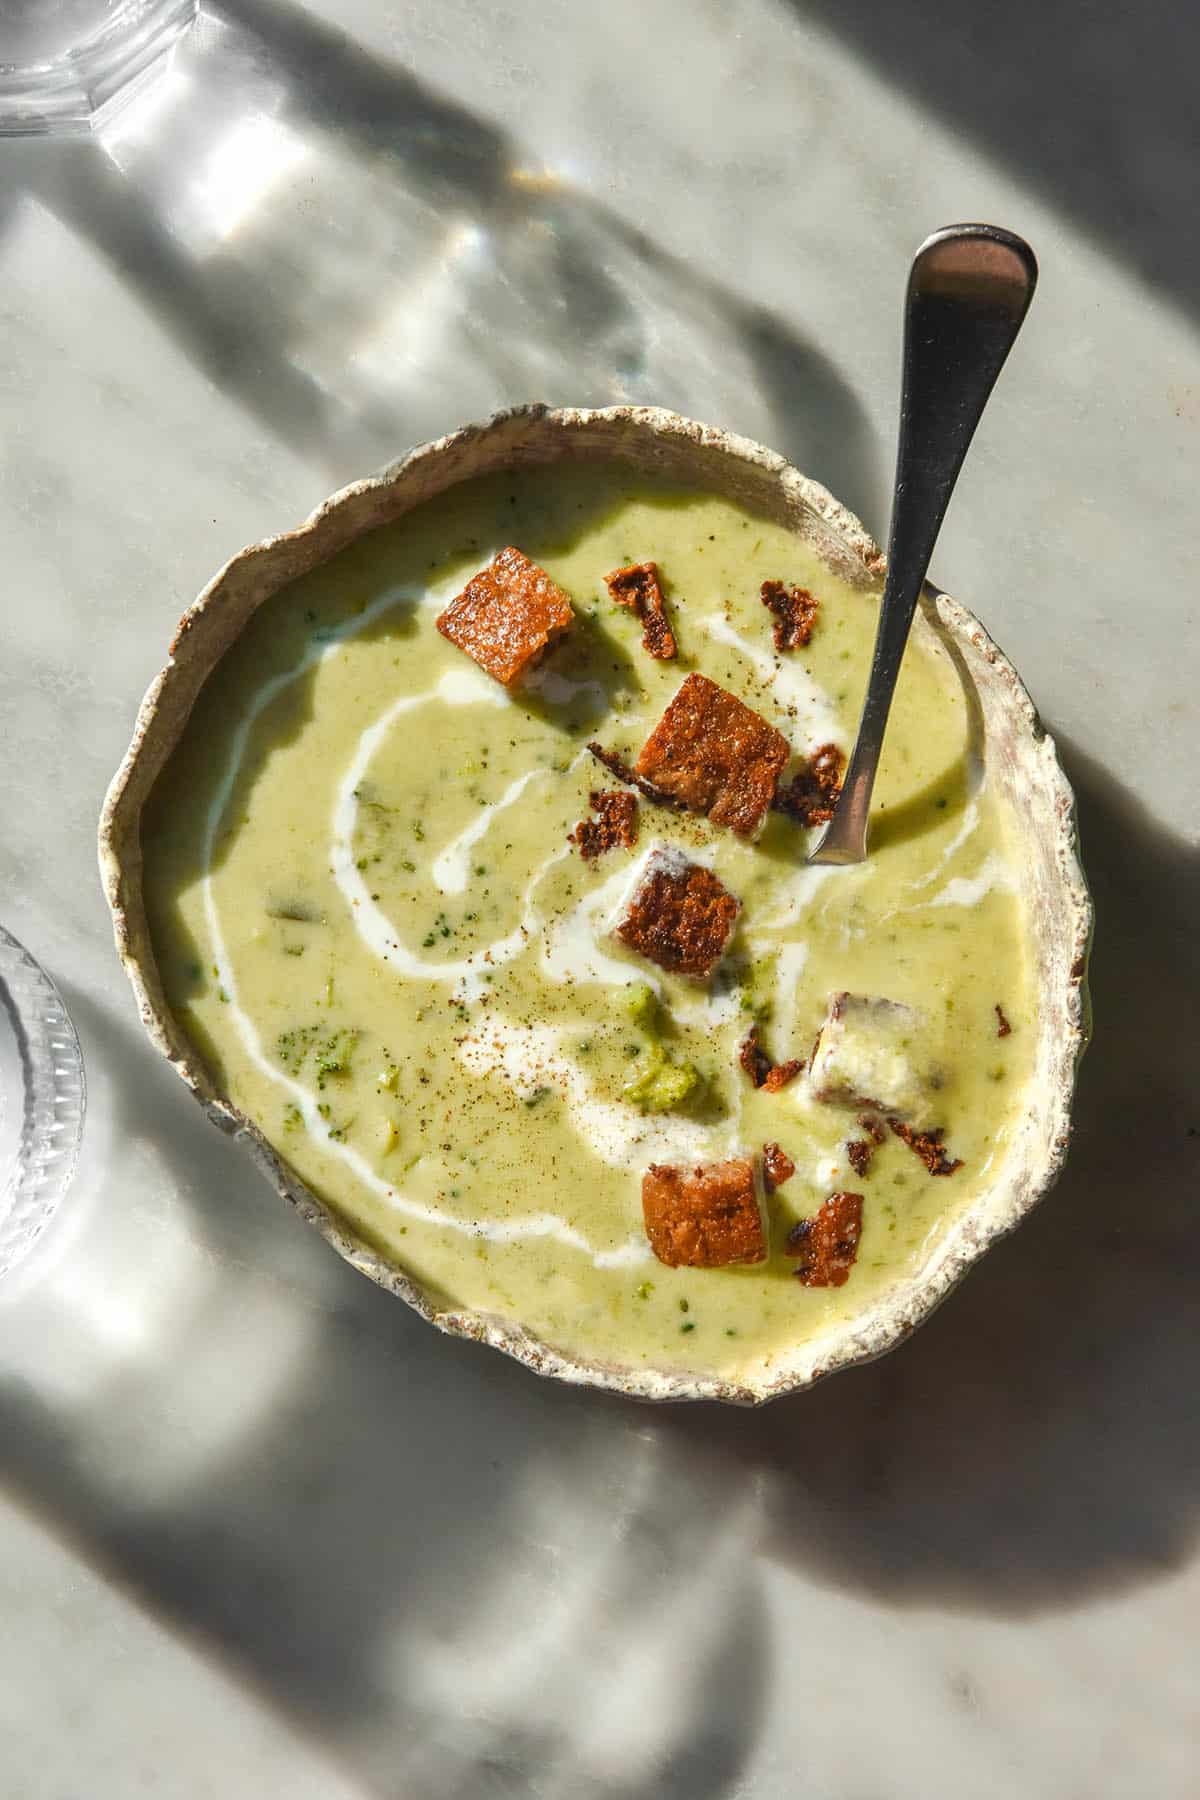 An aerial image of a white misshapen ceramic bowl filled with low FODMAP broccoli cheddar soup. The glass sits on a white marble table in contrasting sunlight.